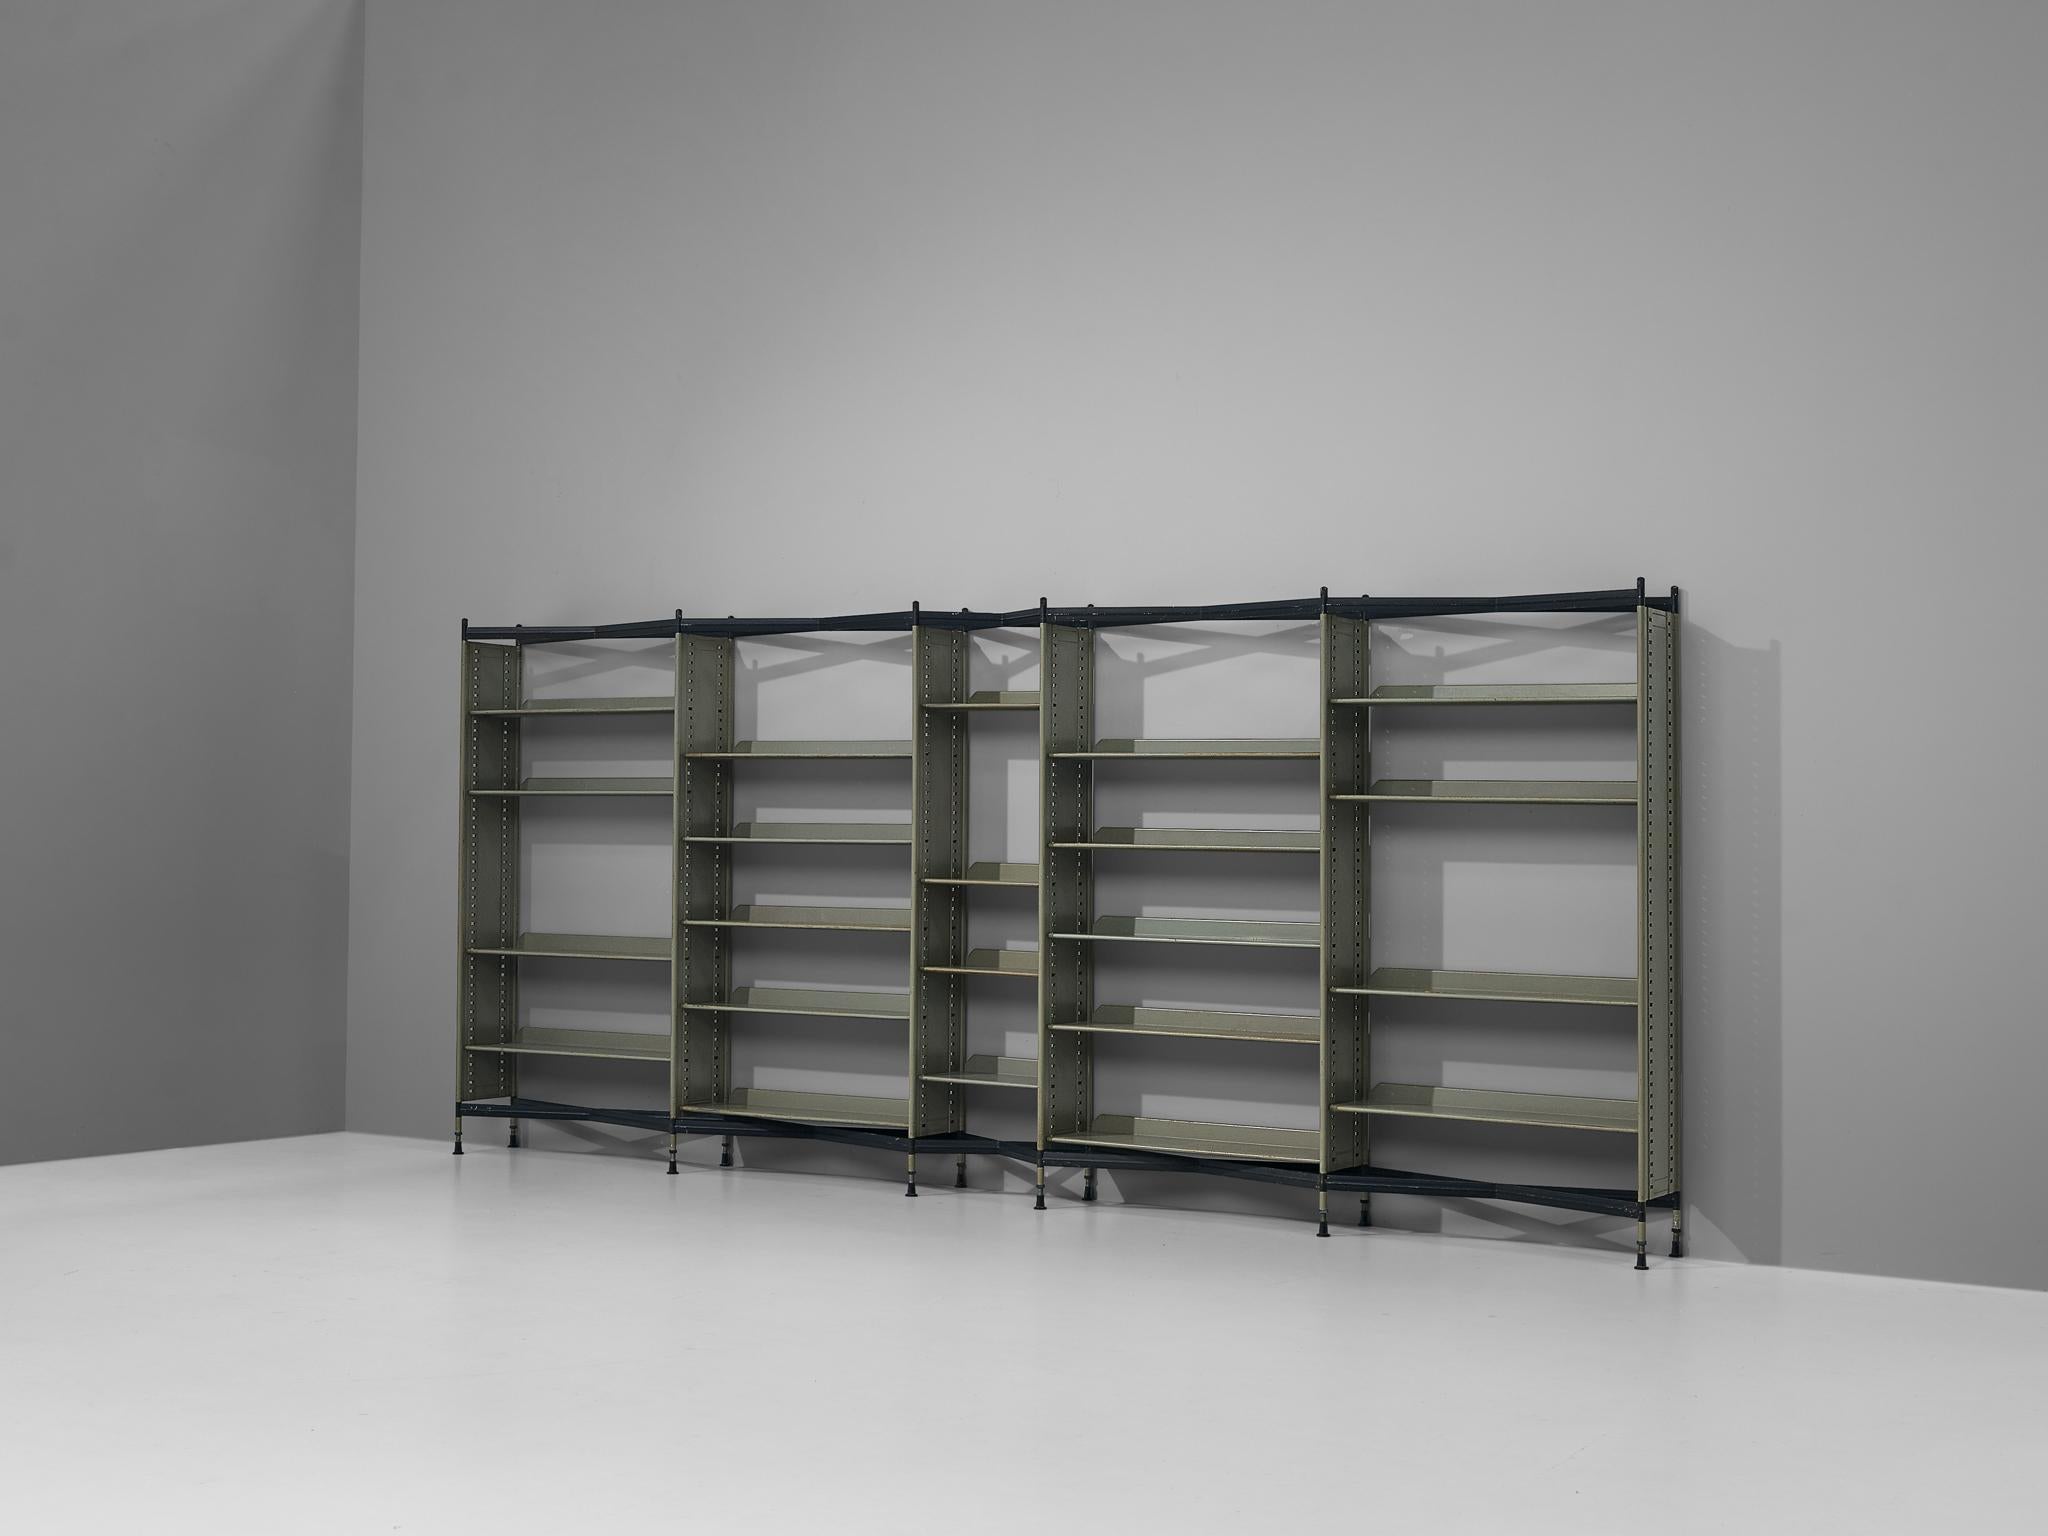 Studio BBPR for Olivetti, 'Spazio' shelving system, metal, plastic, Italy, 1960 

This open shelf is part of Studio BBPR's 'Spazio' series and consists of many columns in different widths. The arrangement itself is adjustable to your own liking. The